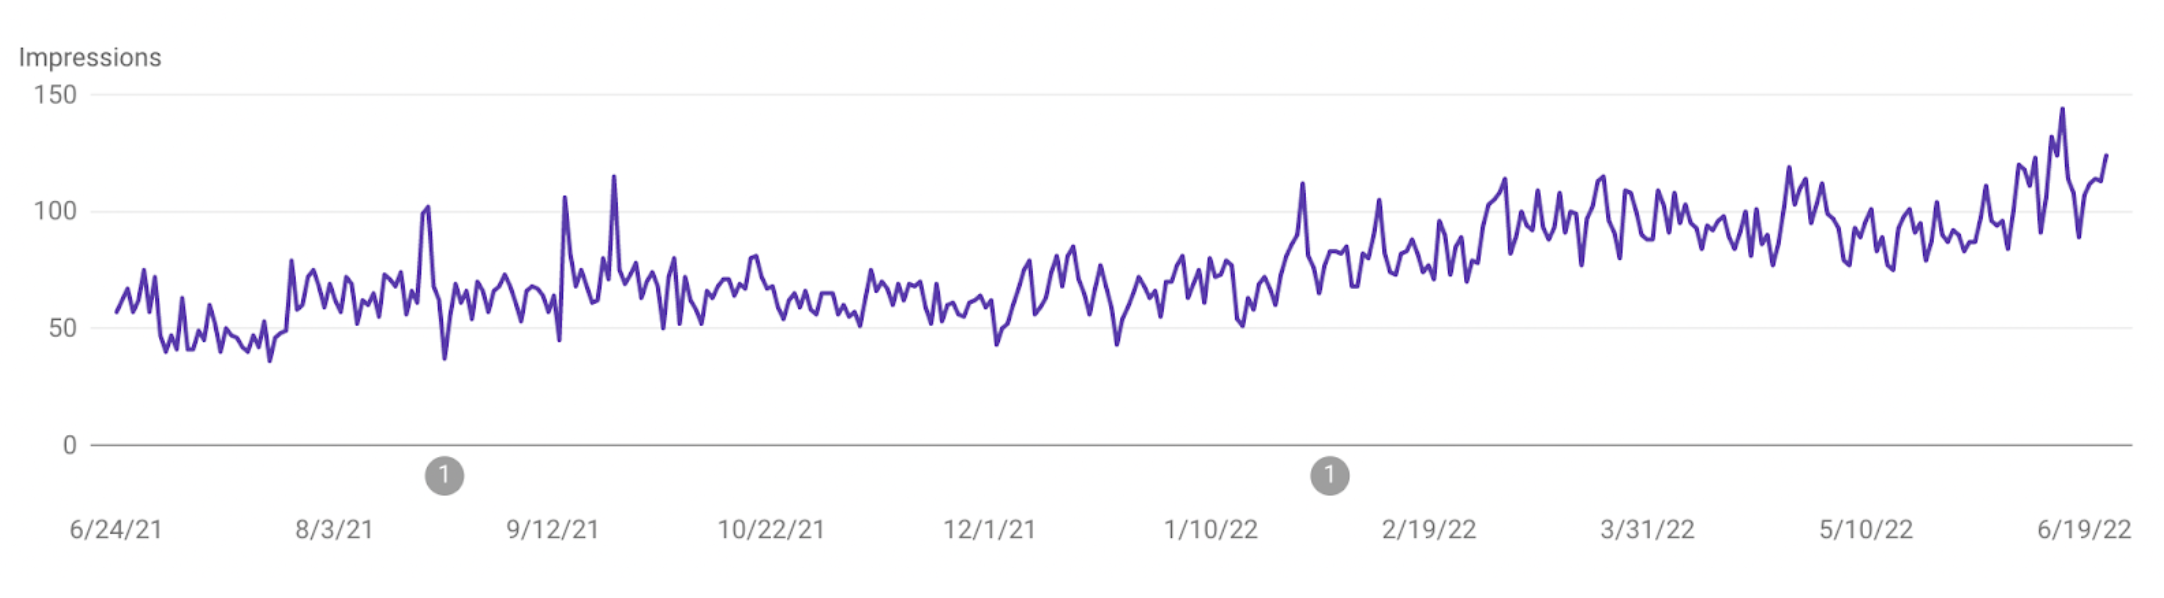 Example of Impressions metric as charted over time by Google Search Console